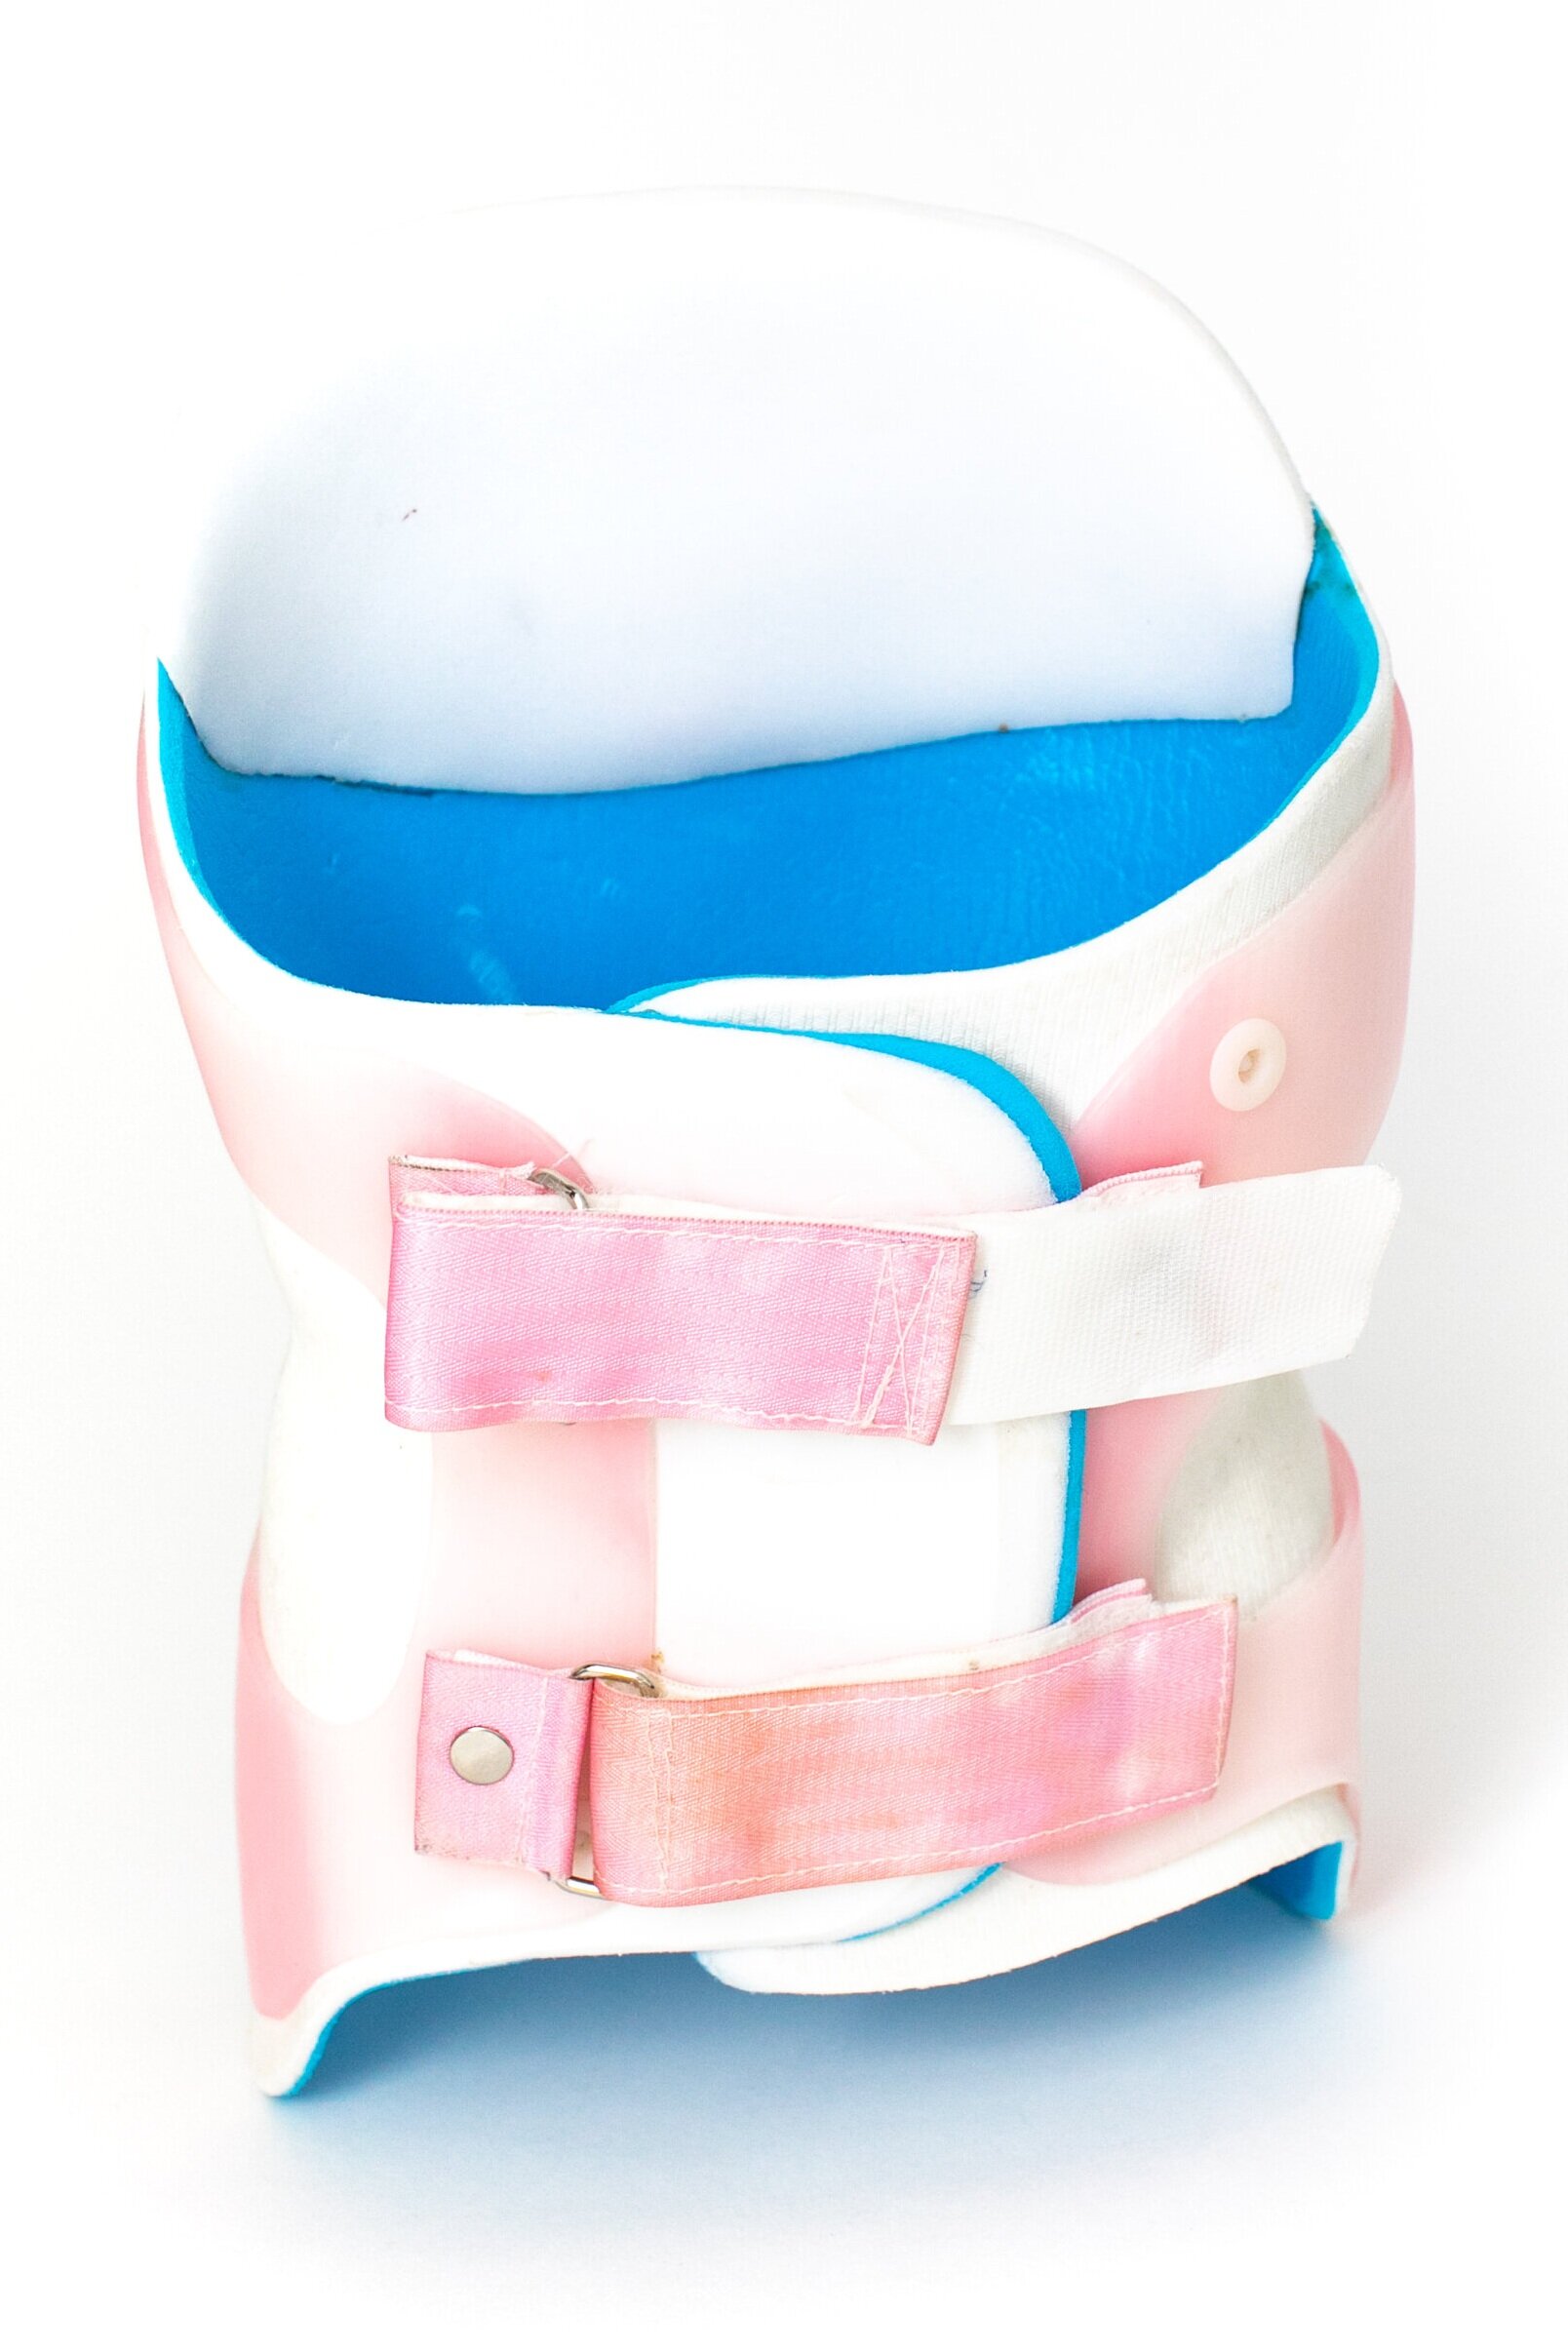 Spinal Orthosis — OrthoProActive Consultants inc.